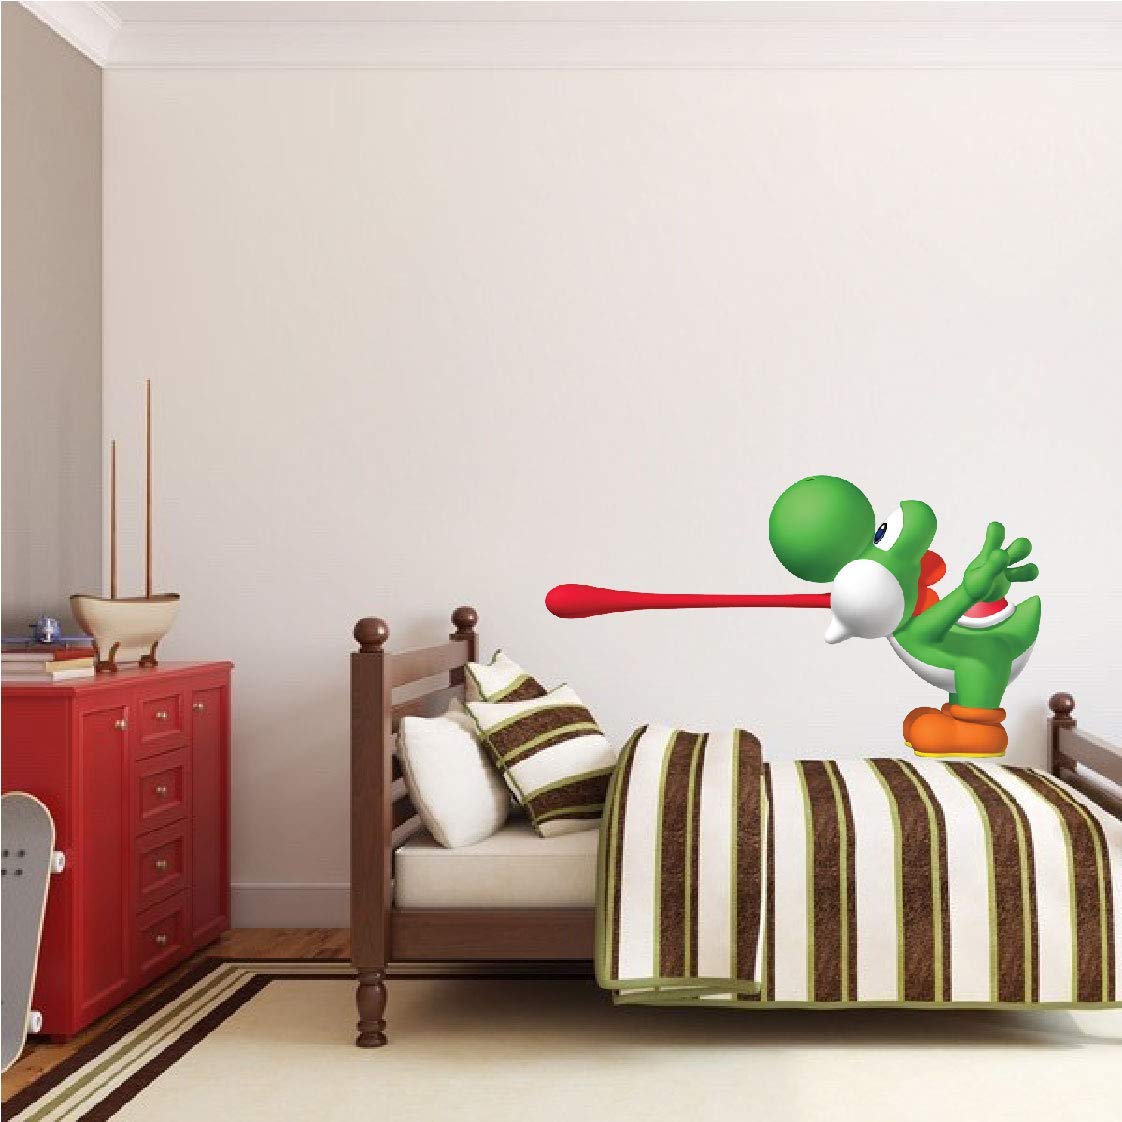 Super Mario Brothers Wall Decal , HD Wallpaper & Backgrounds